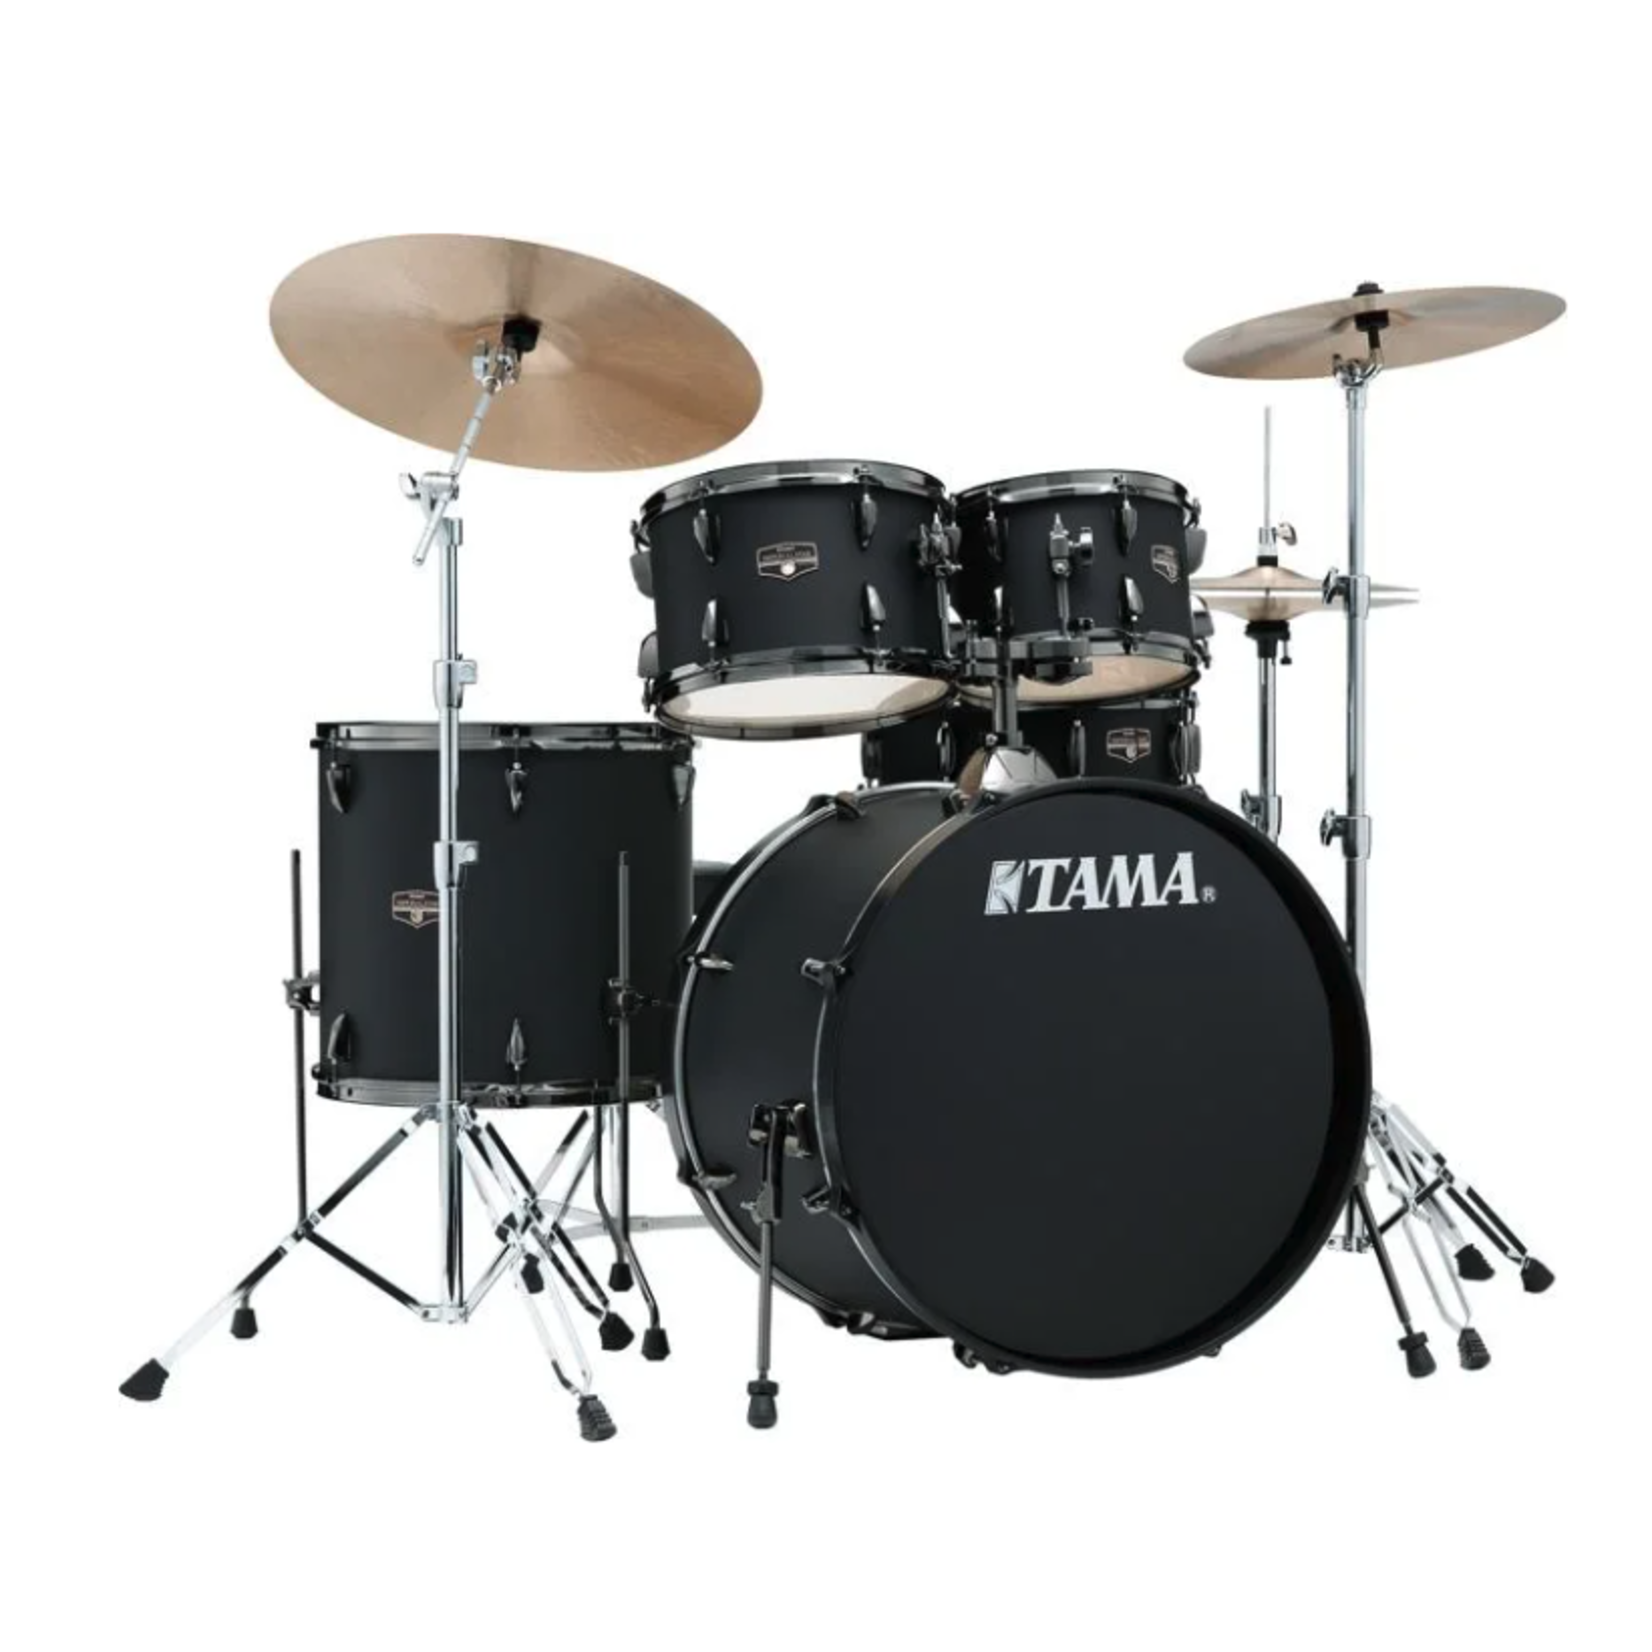 Tama Imperialstar IE52C 5-piece Complete Drum Set - Blacked Out Black